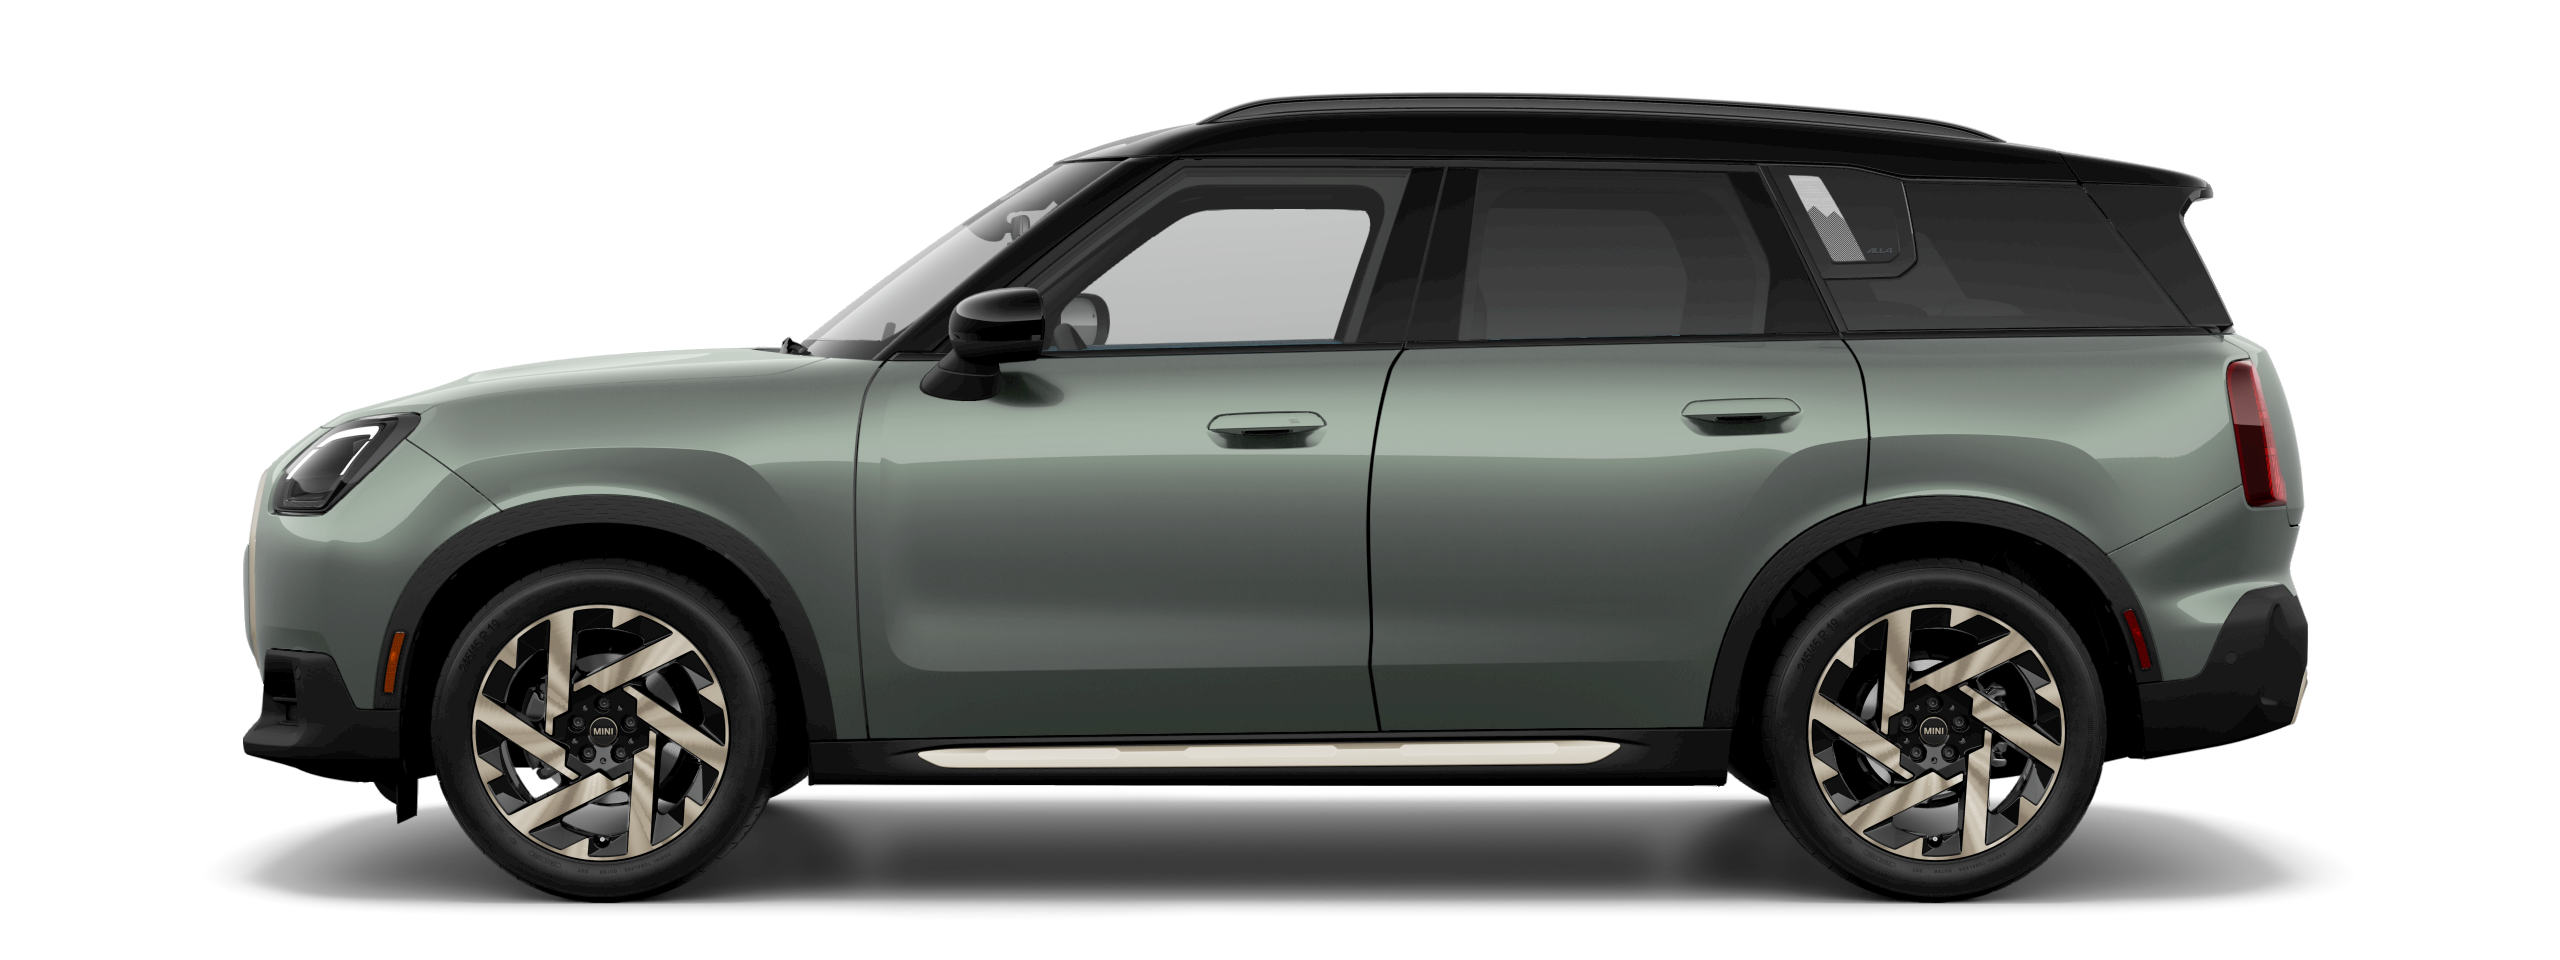 Side view of a 2025 MINI Countryman S in the Smokey Green body color, facing left with its shadow underneath it.